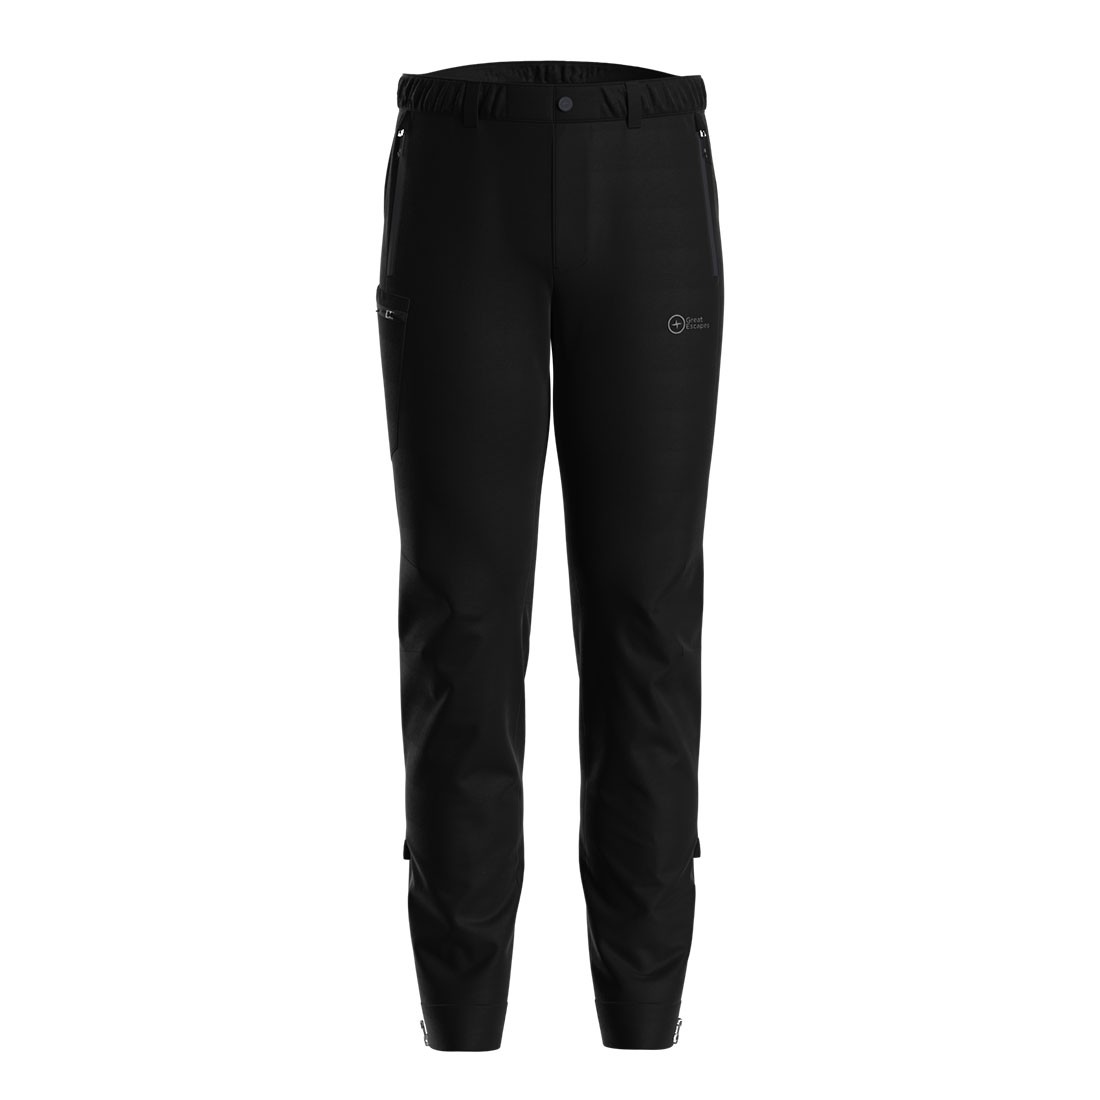 MARCUS - Man winter recycled pants